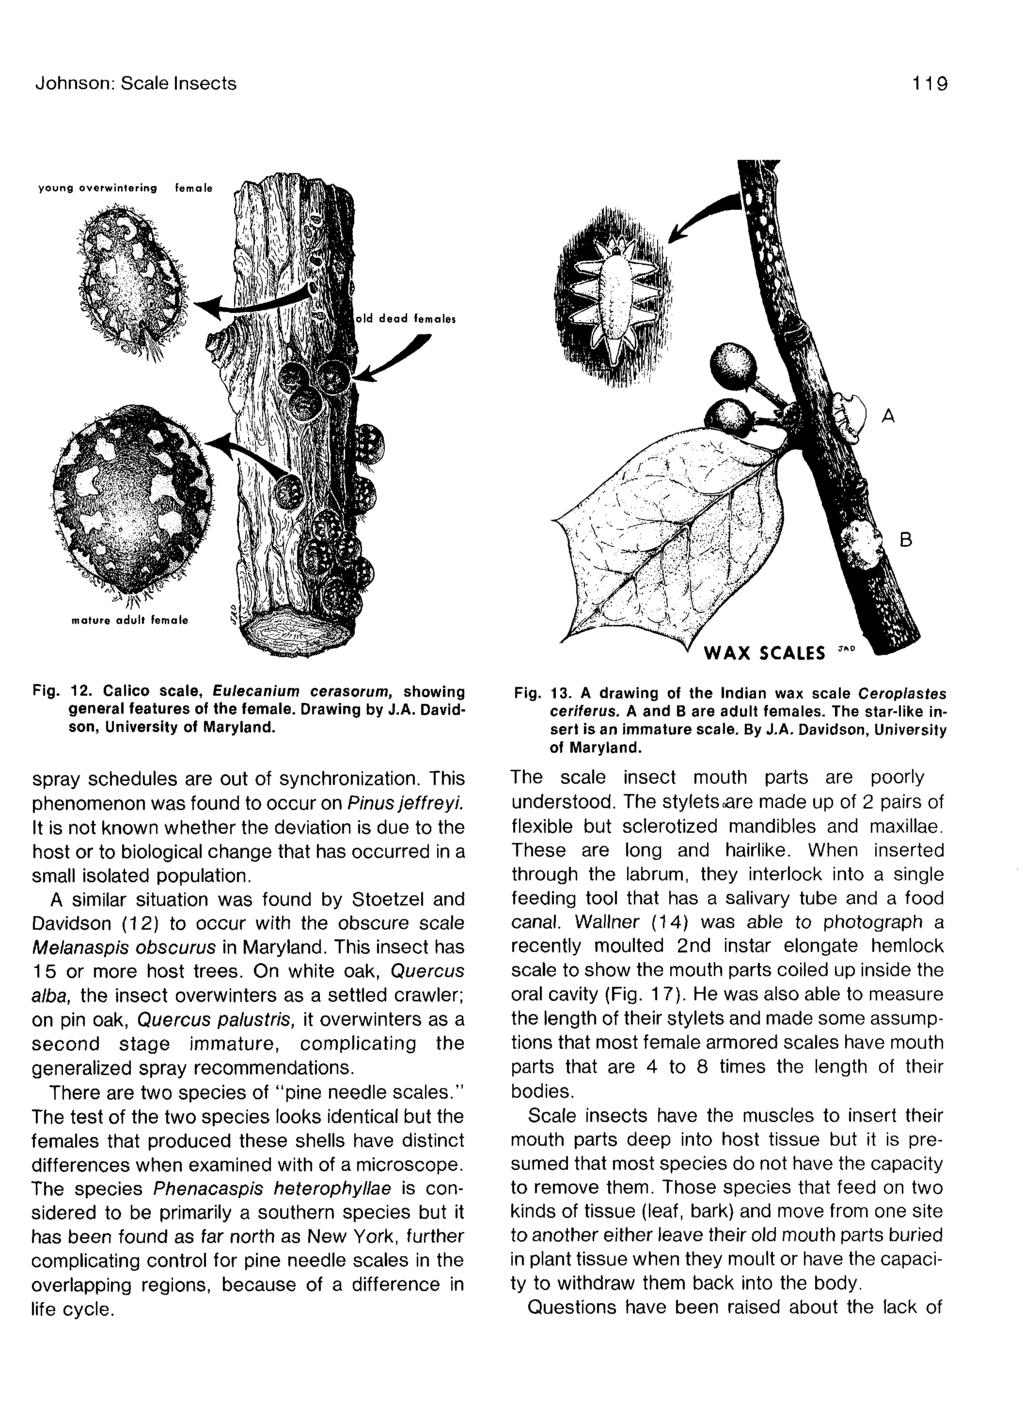 Johnson: Scale Insects 119 young overwintering Id dead females B mature adult femal< WAX SCALES Fig. 12. Calico scale, Eulecanium cerasorum, showing general features of the female. Drawing by J.A. Davidson, University of Maryland.